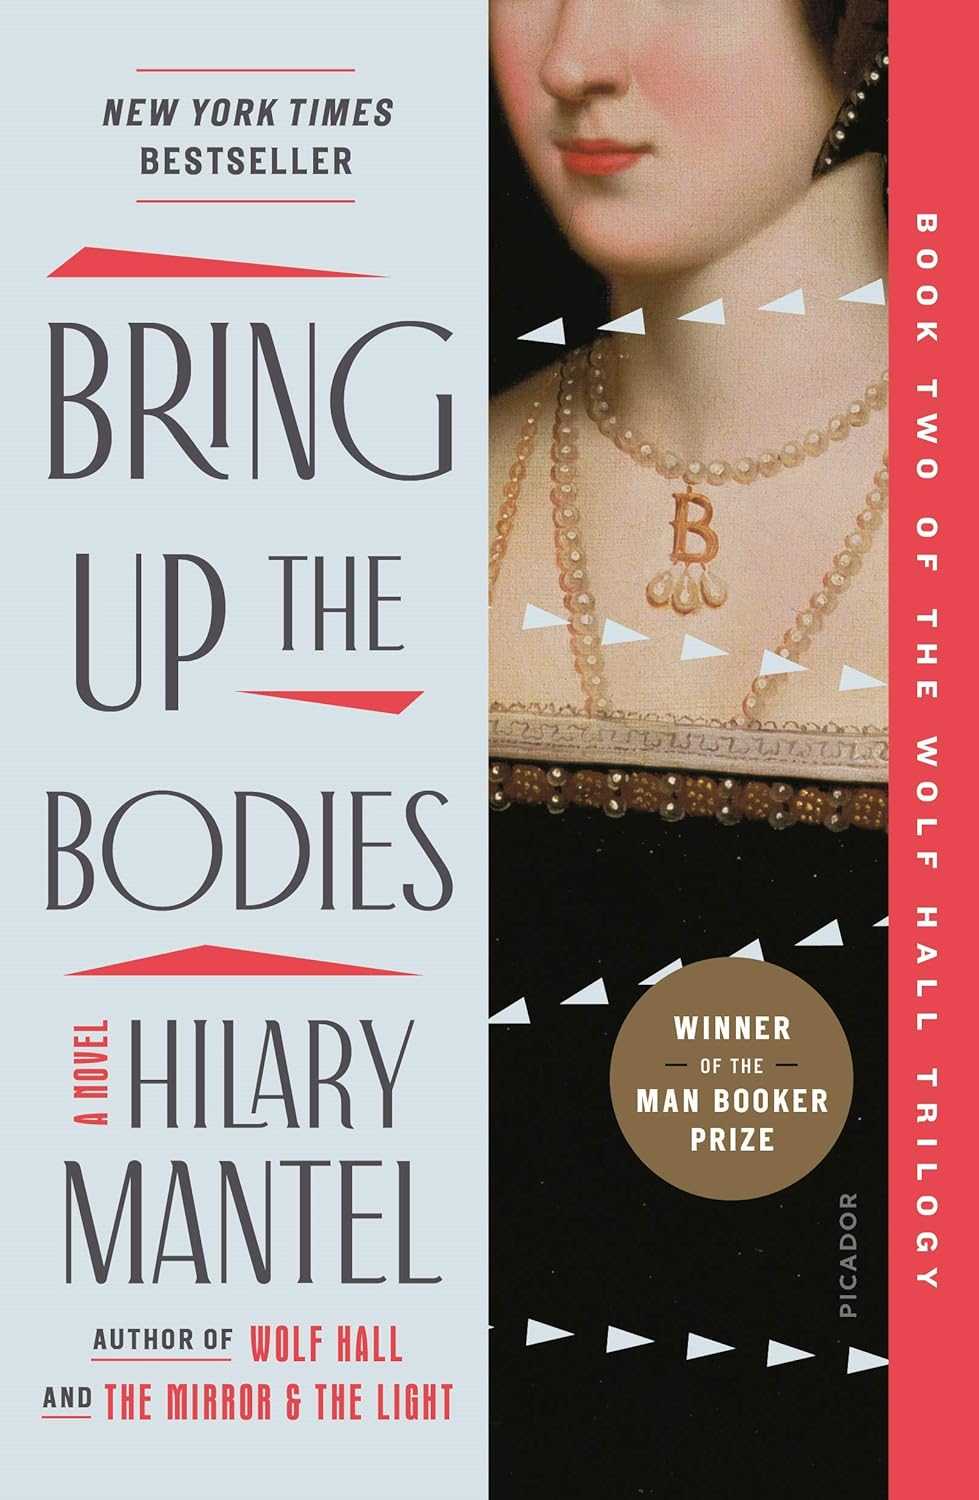 Book cover art Bring Up the Bodies by Hillary Mantel, a Top Ten Tuesday Hurry Up and Wait book.